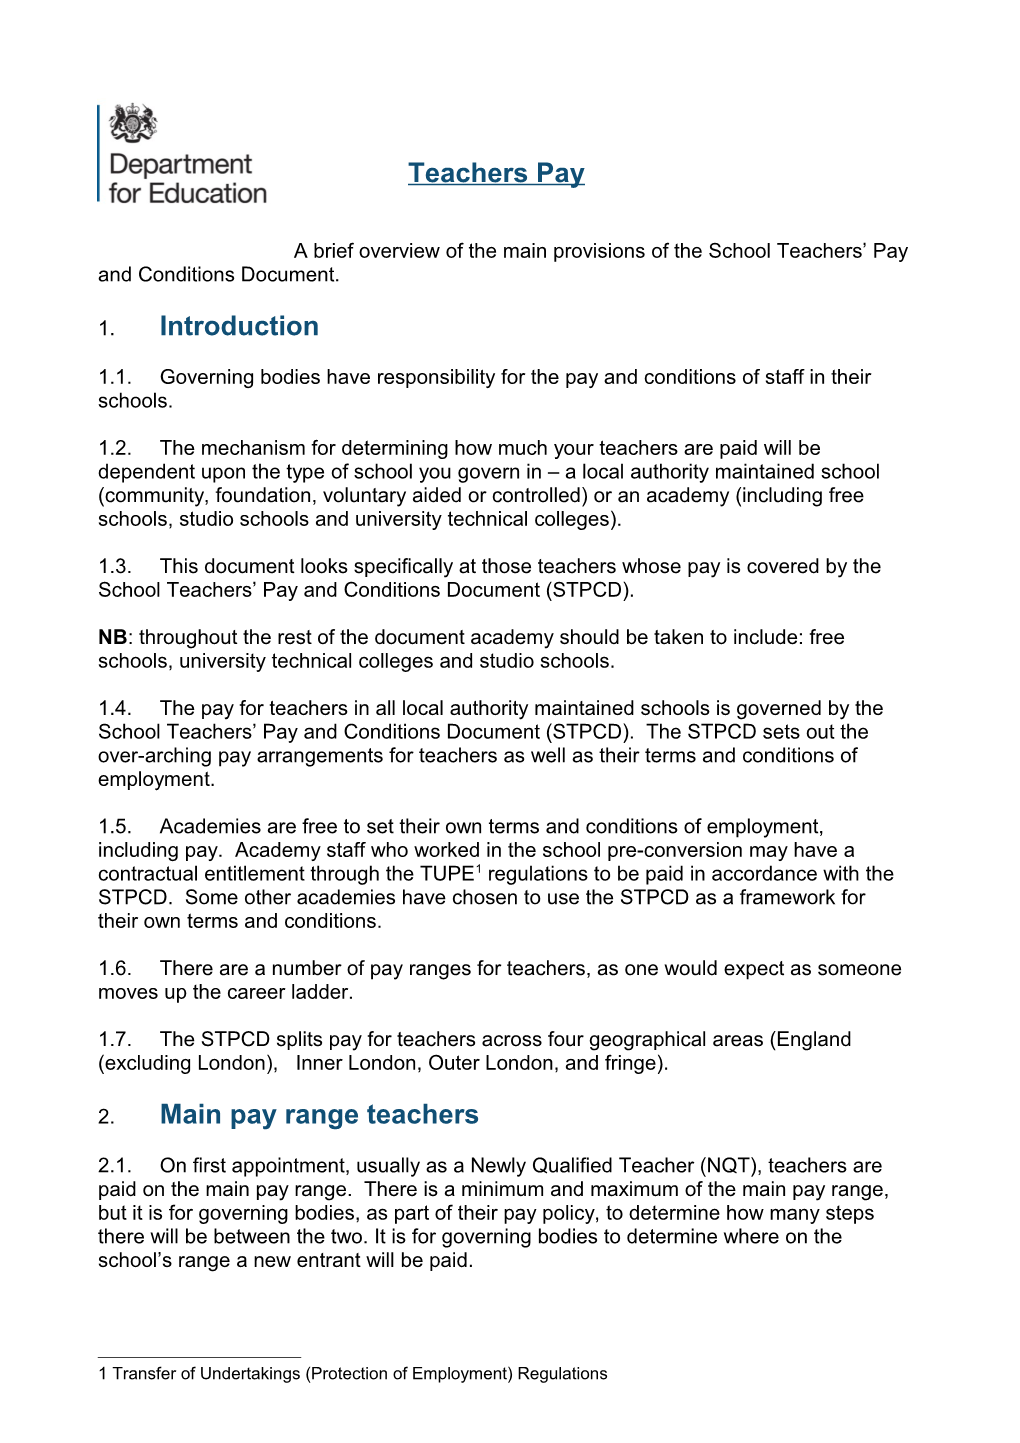 A Brief Overview of the Main Provisions of the School Teachers Pay and Conditions Document